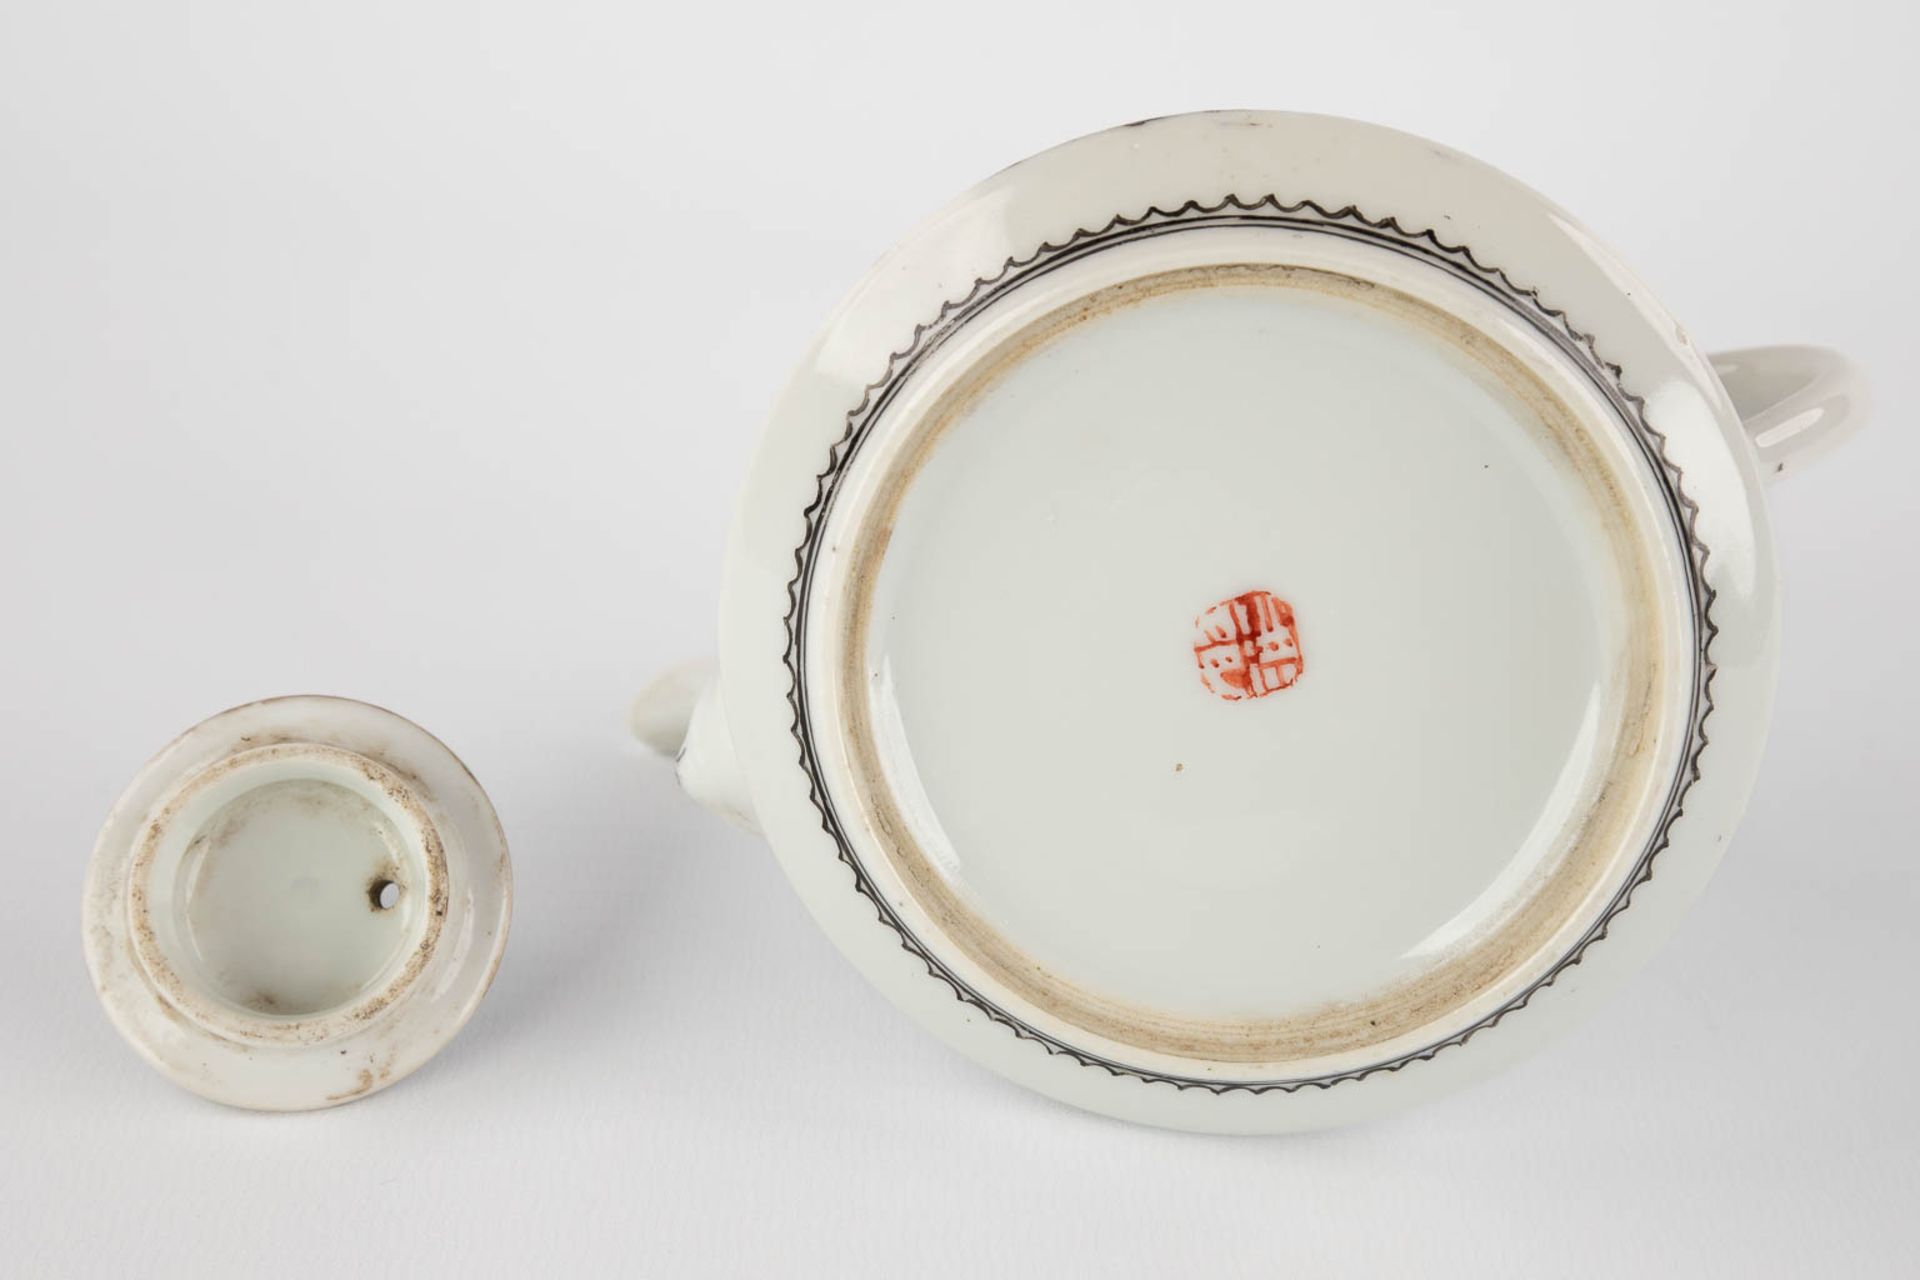 A Chinese teapot with landscape decor, 20th C. (D:11 x W:15 x H:9 cm) - Image 7 of 14